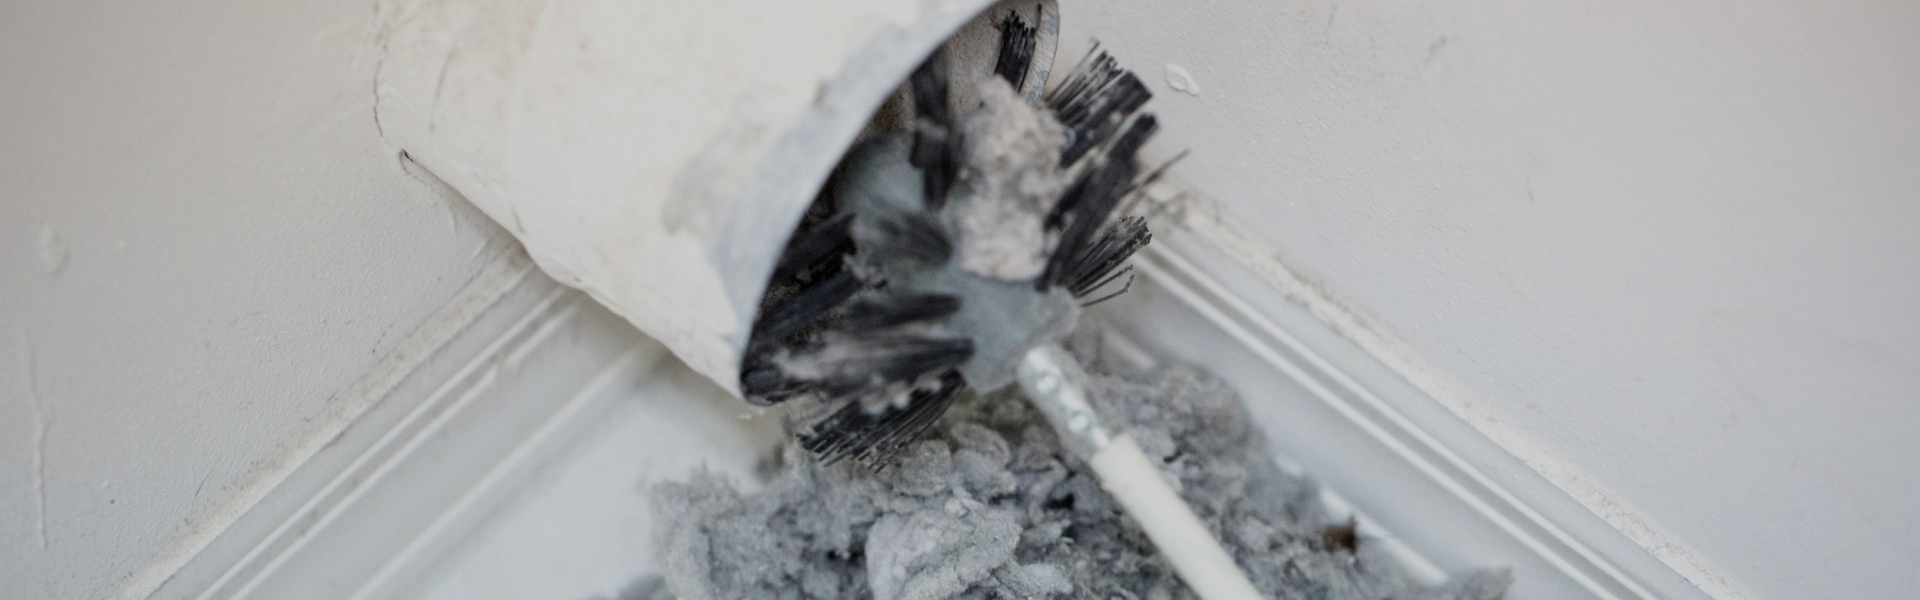 hero dryer vent cleaning service spring tx